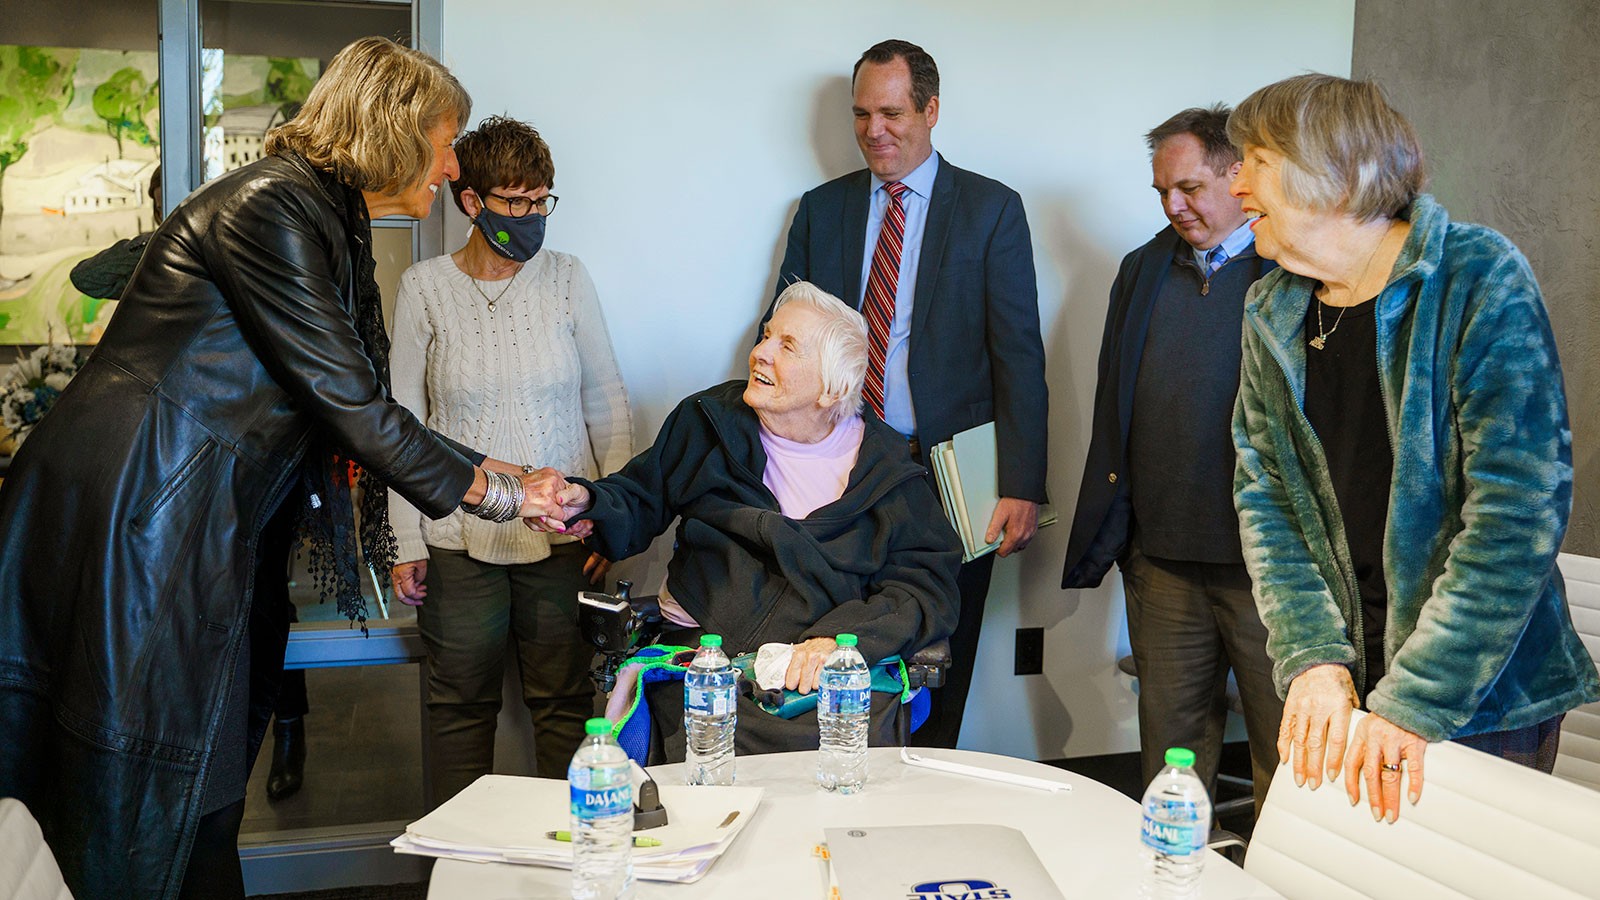 USU President Noelle Cockett shakes hands with Mary Bastian as others look on.